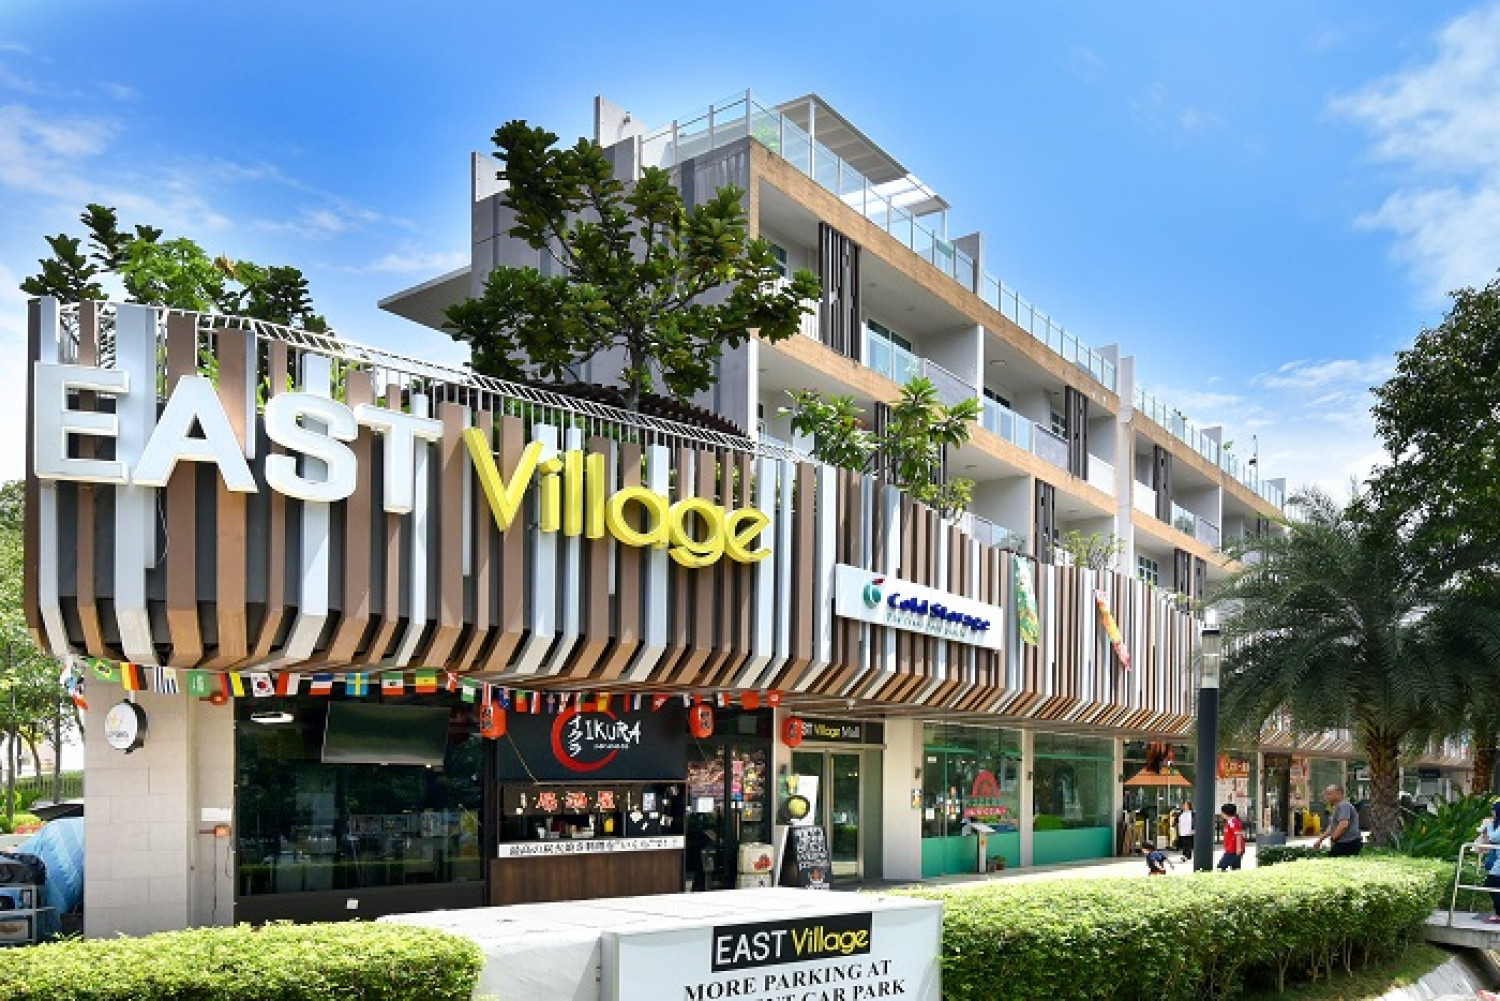 Mortgagee sale of strata shop unit at East Village for $1.35 mil - Property News